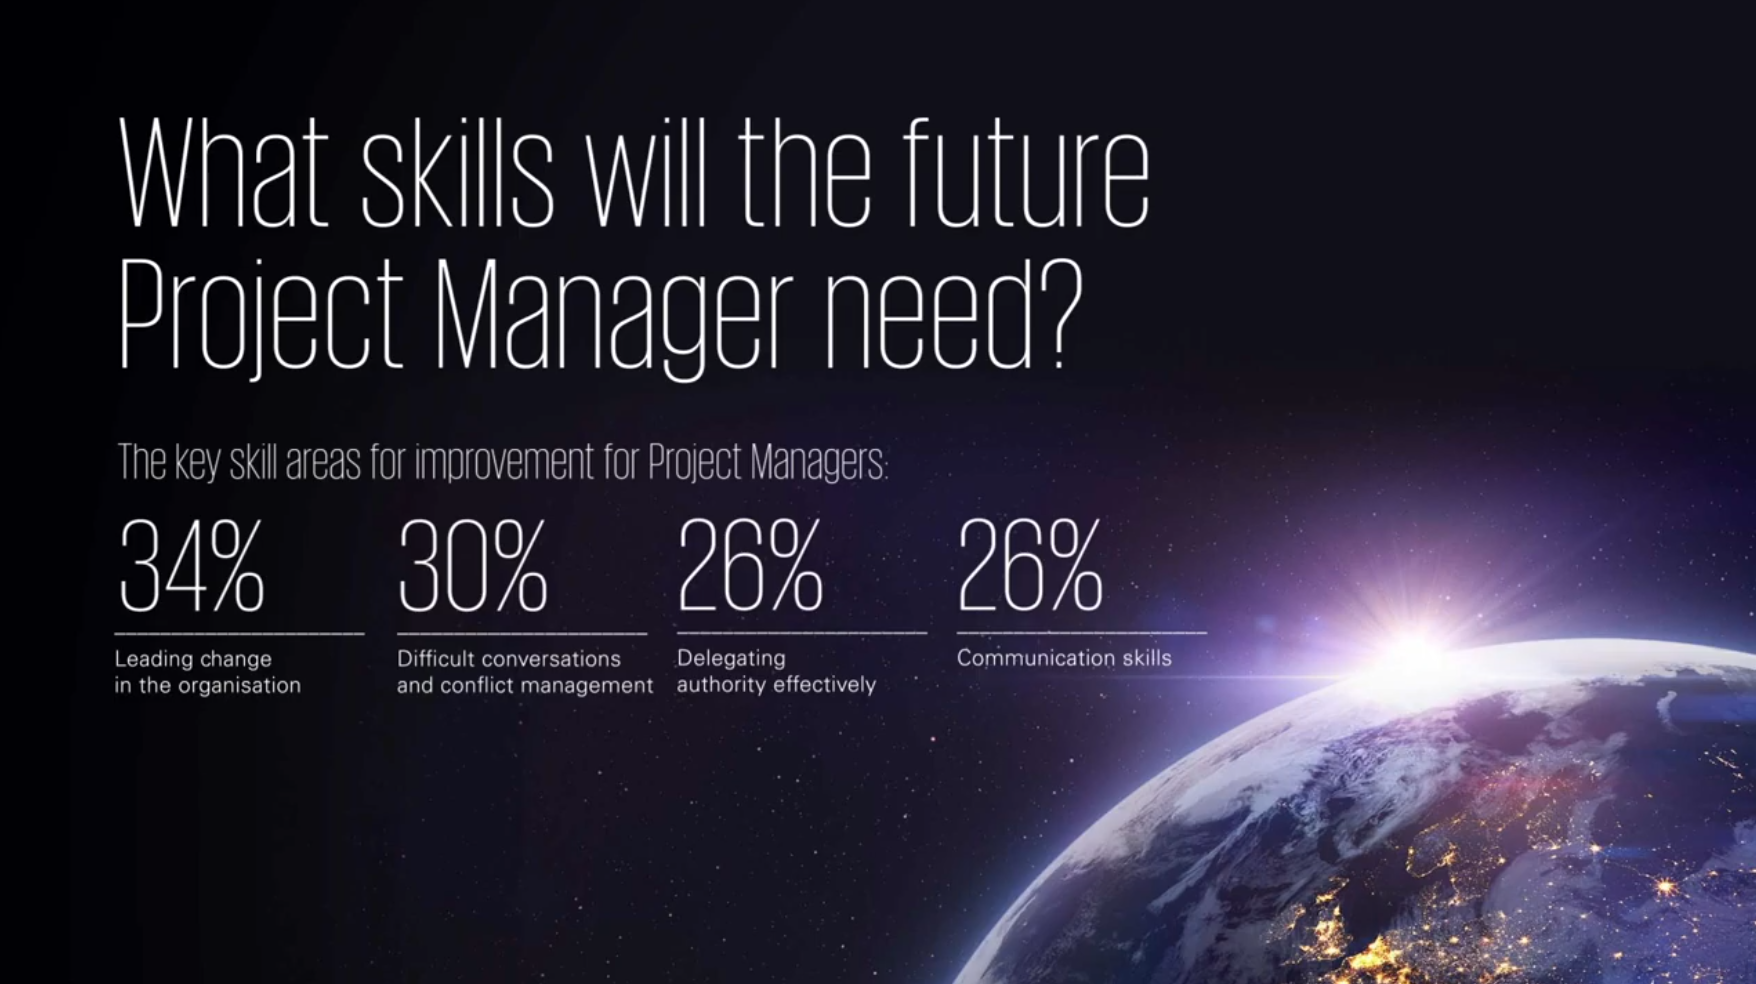 What skills will the future project manager need?